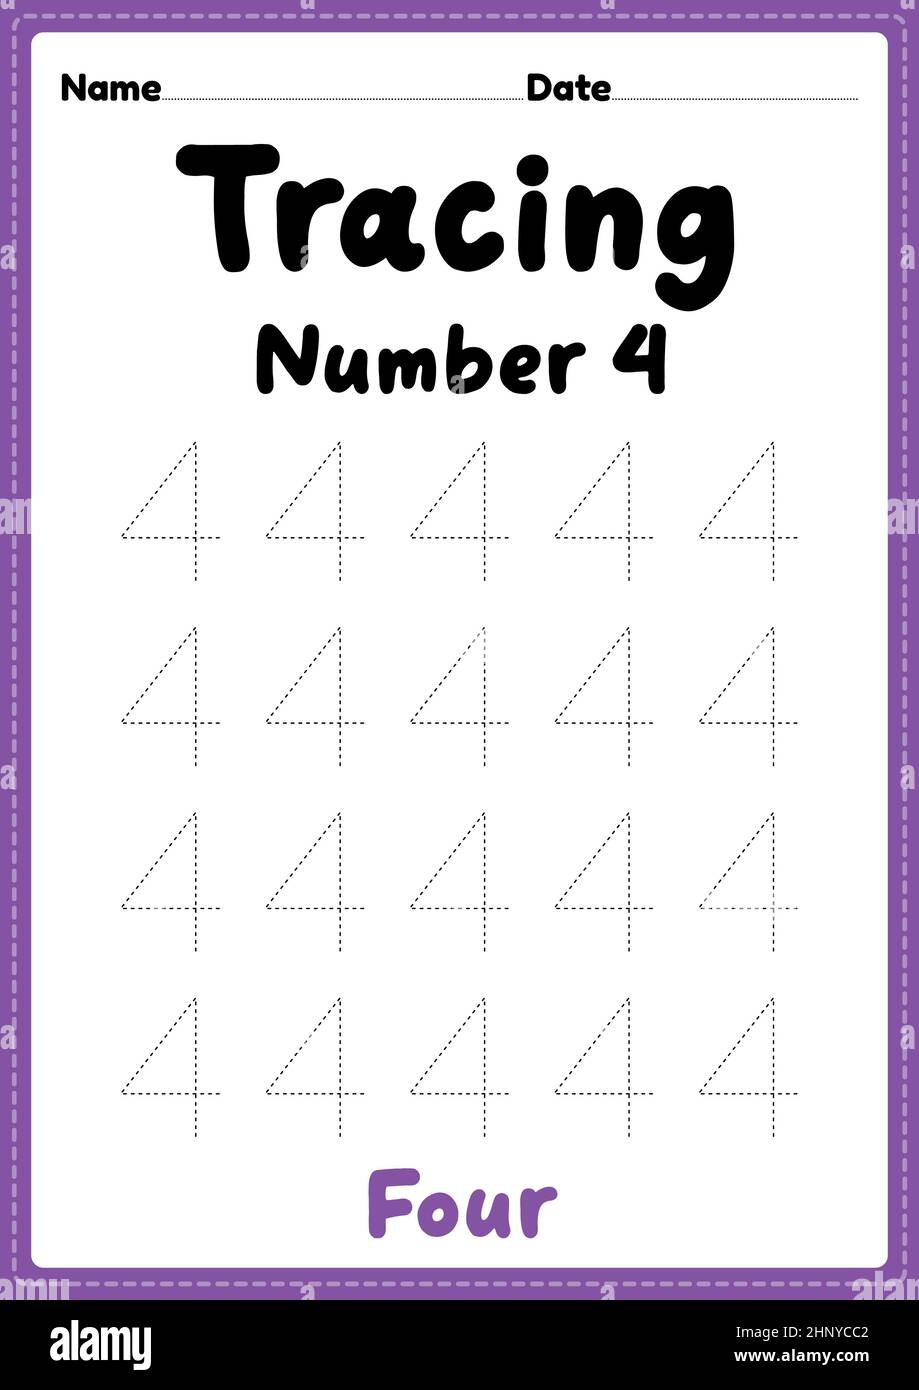 Tracing number 4 worksheet for kindergarten, preschool and Montessori kids for learning numbers and handwriting practice activities. Stock Photo